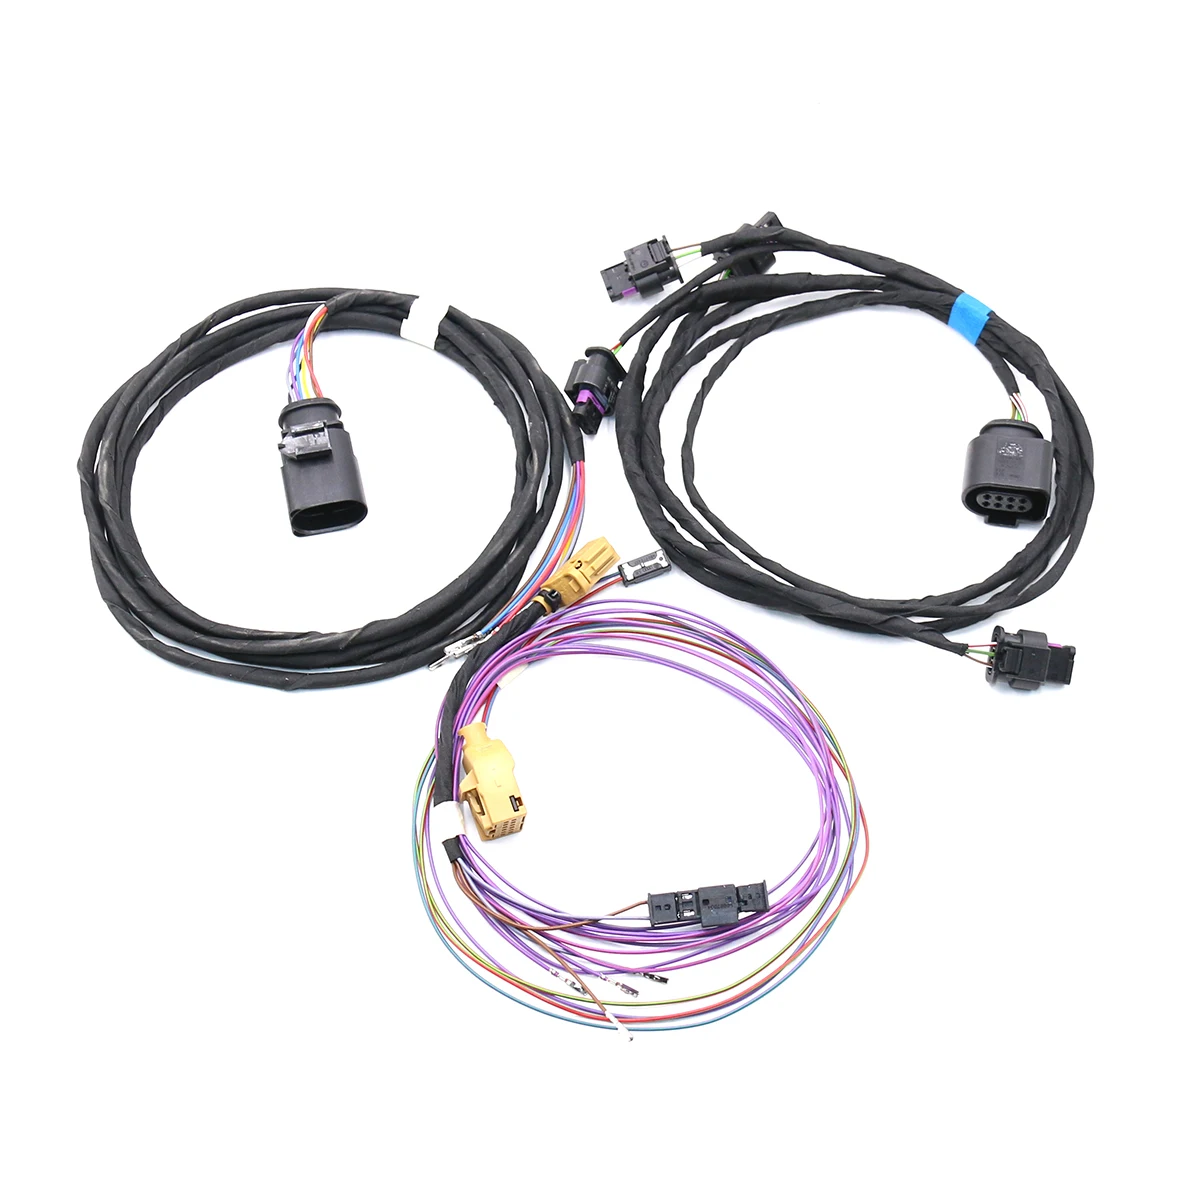 For VW Golf 6 MK6 Park Pilot Parking Front 4K Update 8K PDC OPS Insatll Cable Wire harness